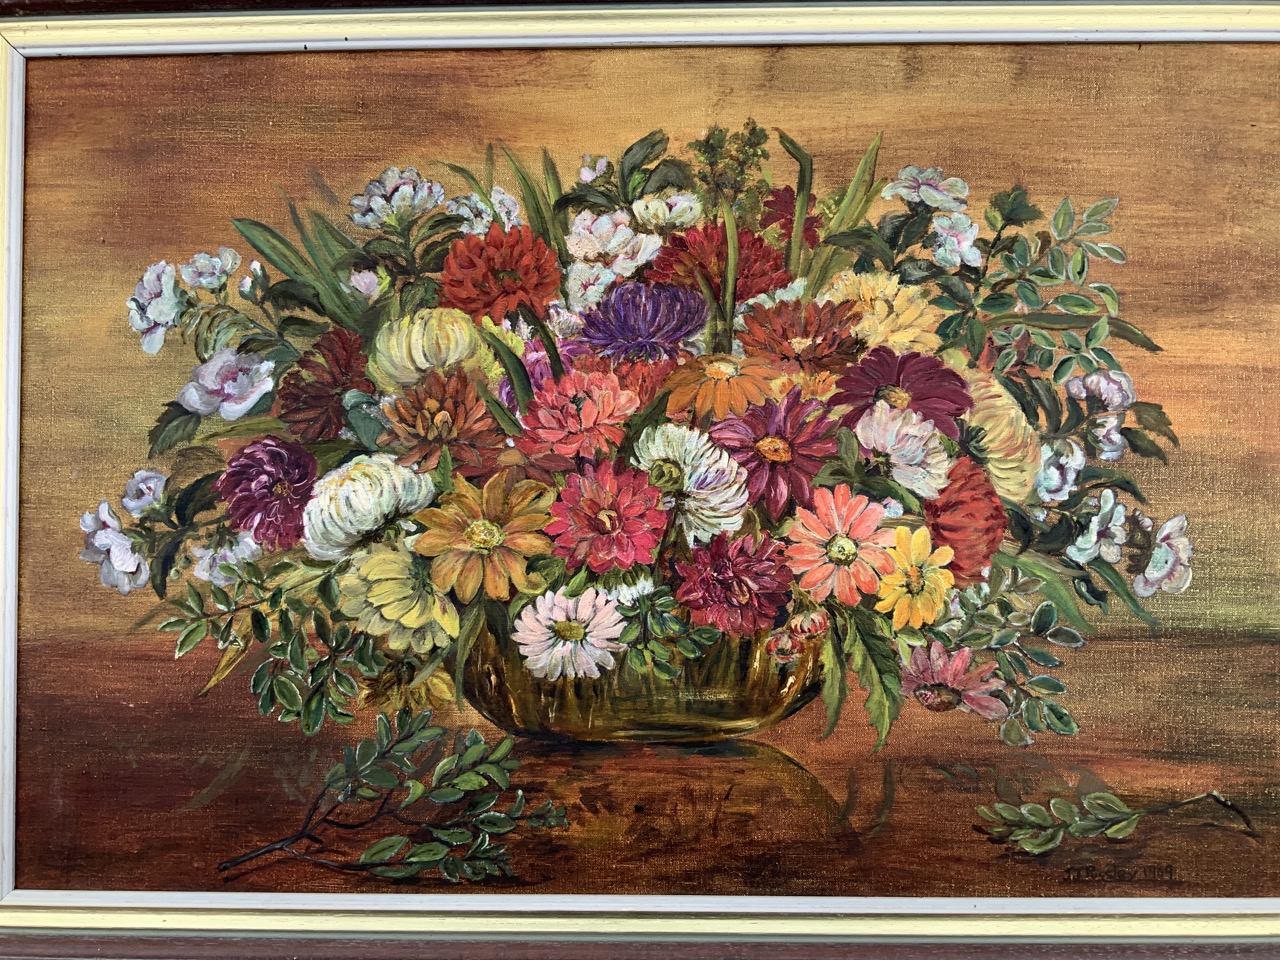 Jennifer J Pugsley, oil on canvas, still life with bright flowers in vase, signed and framed. (